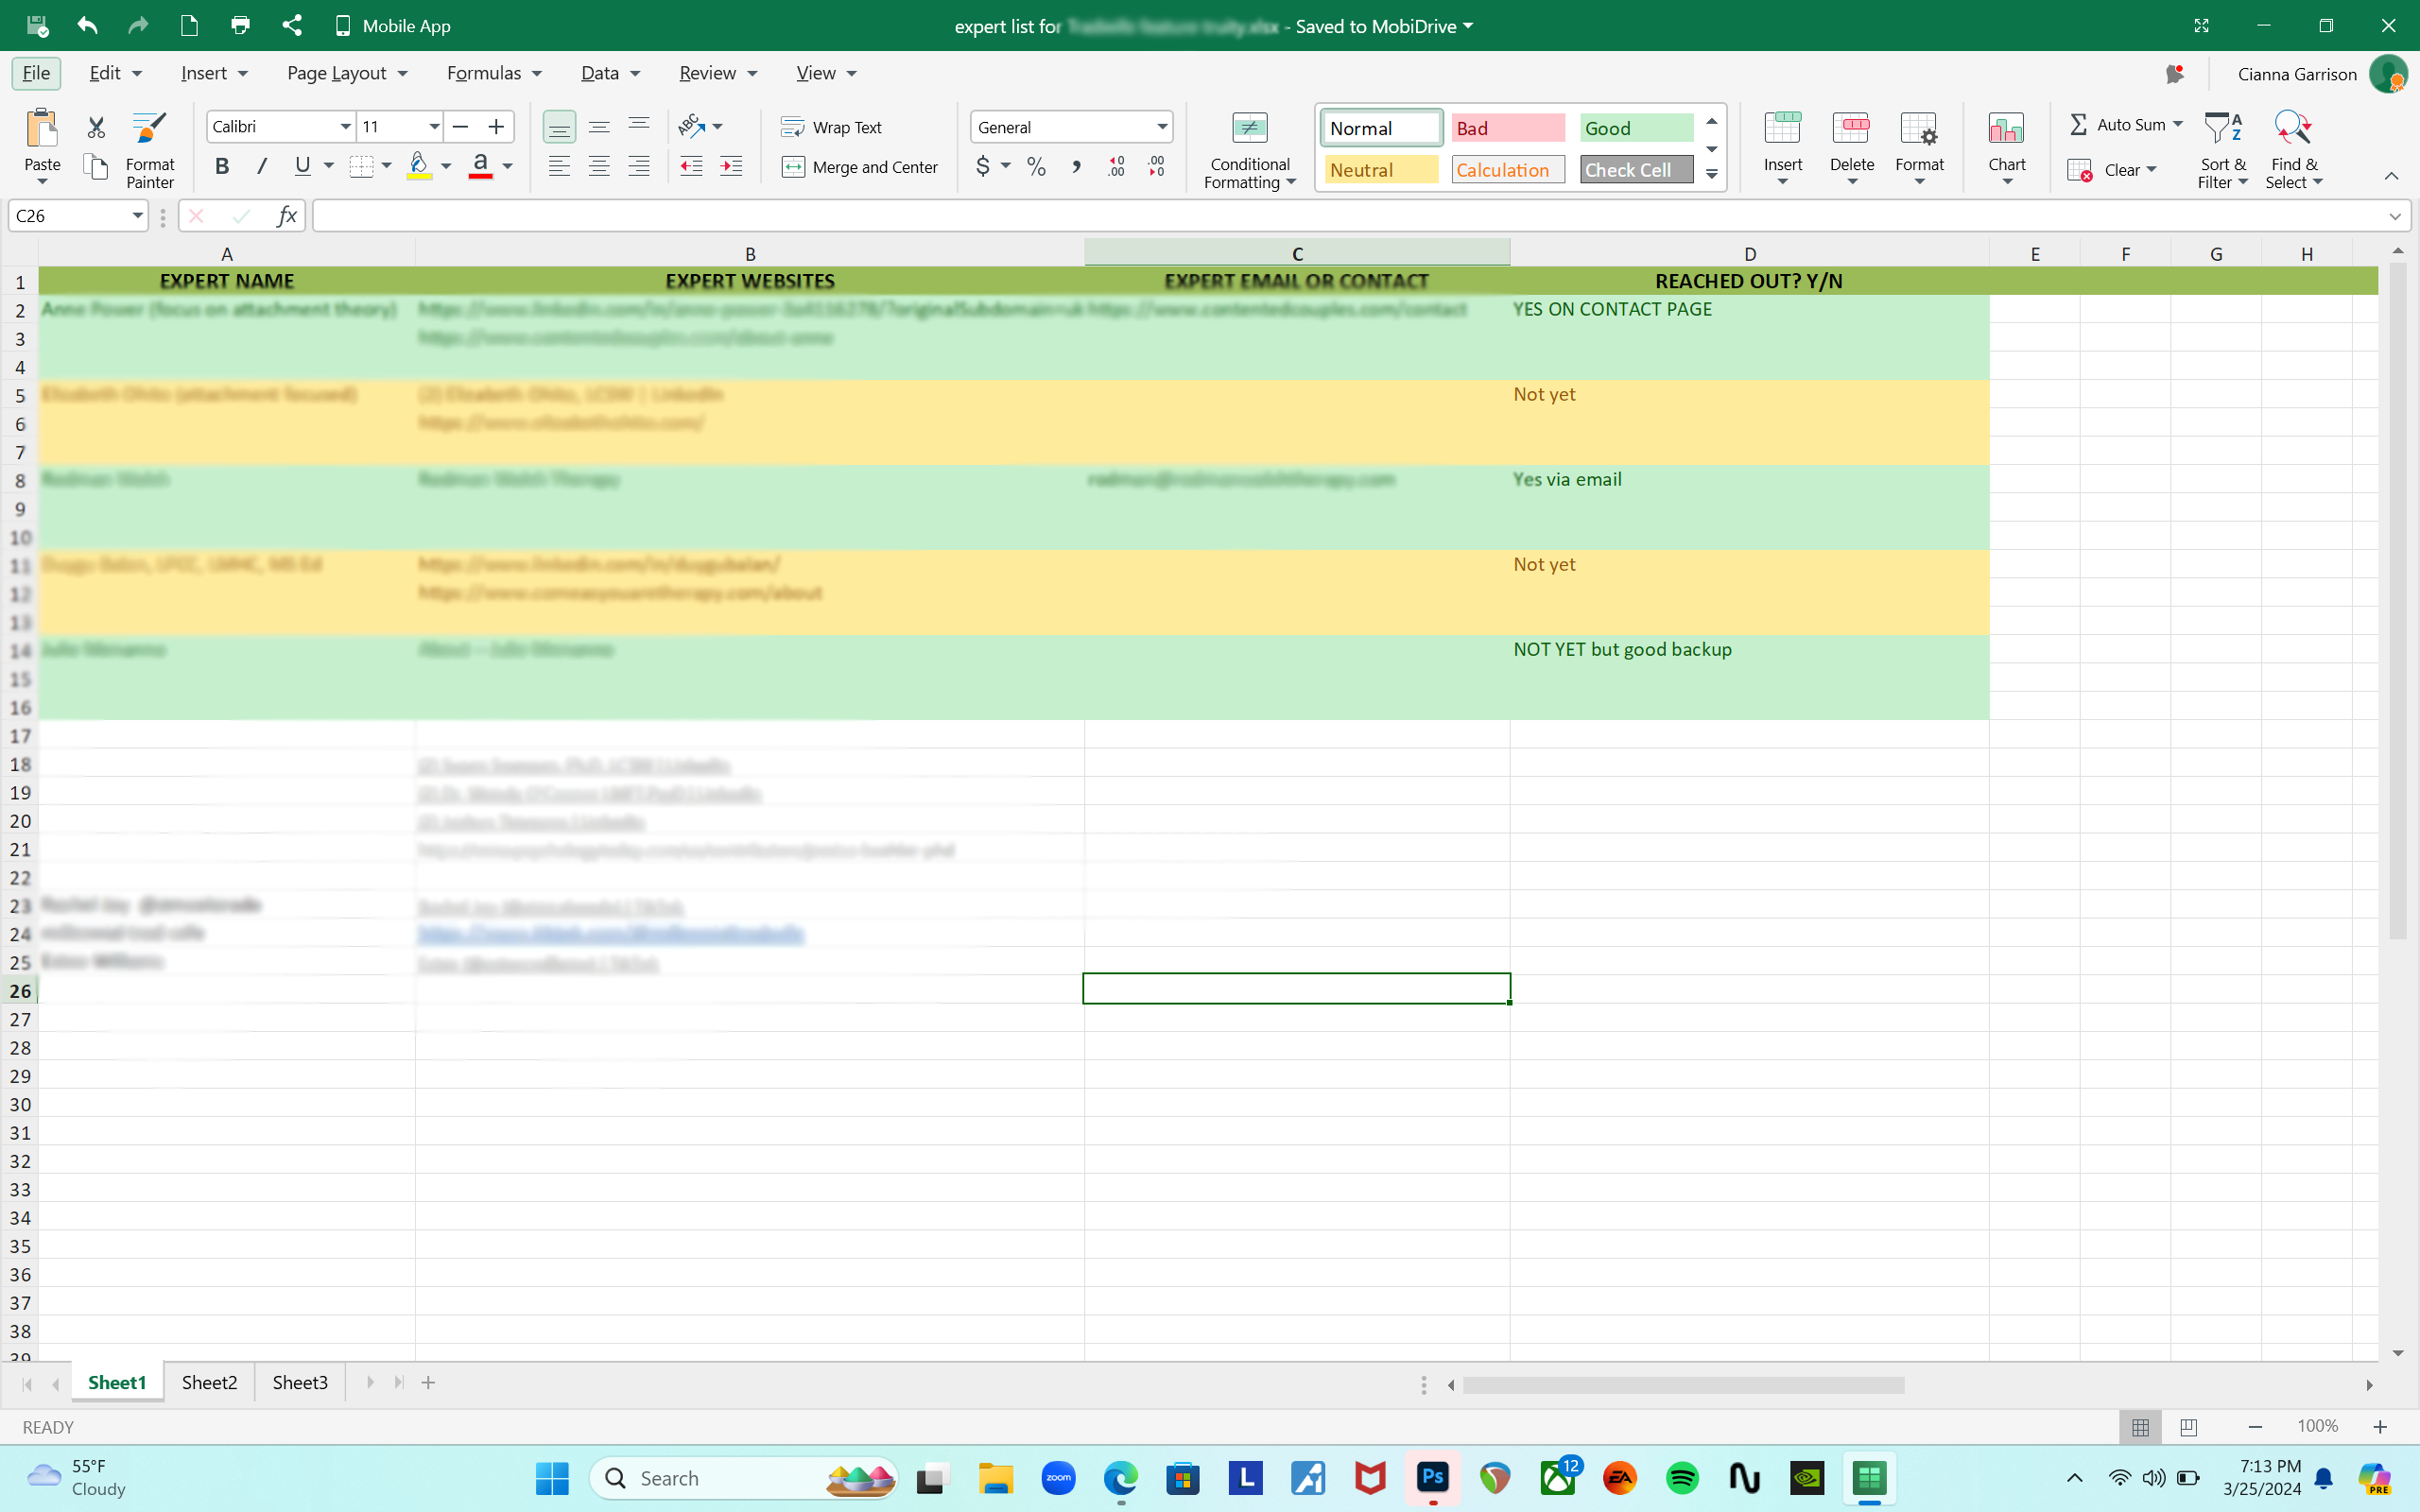 A screenshot of a spreadsheet in OfficeSuite's Sheets.